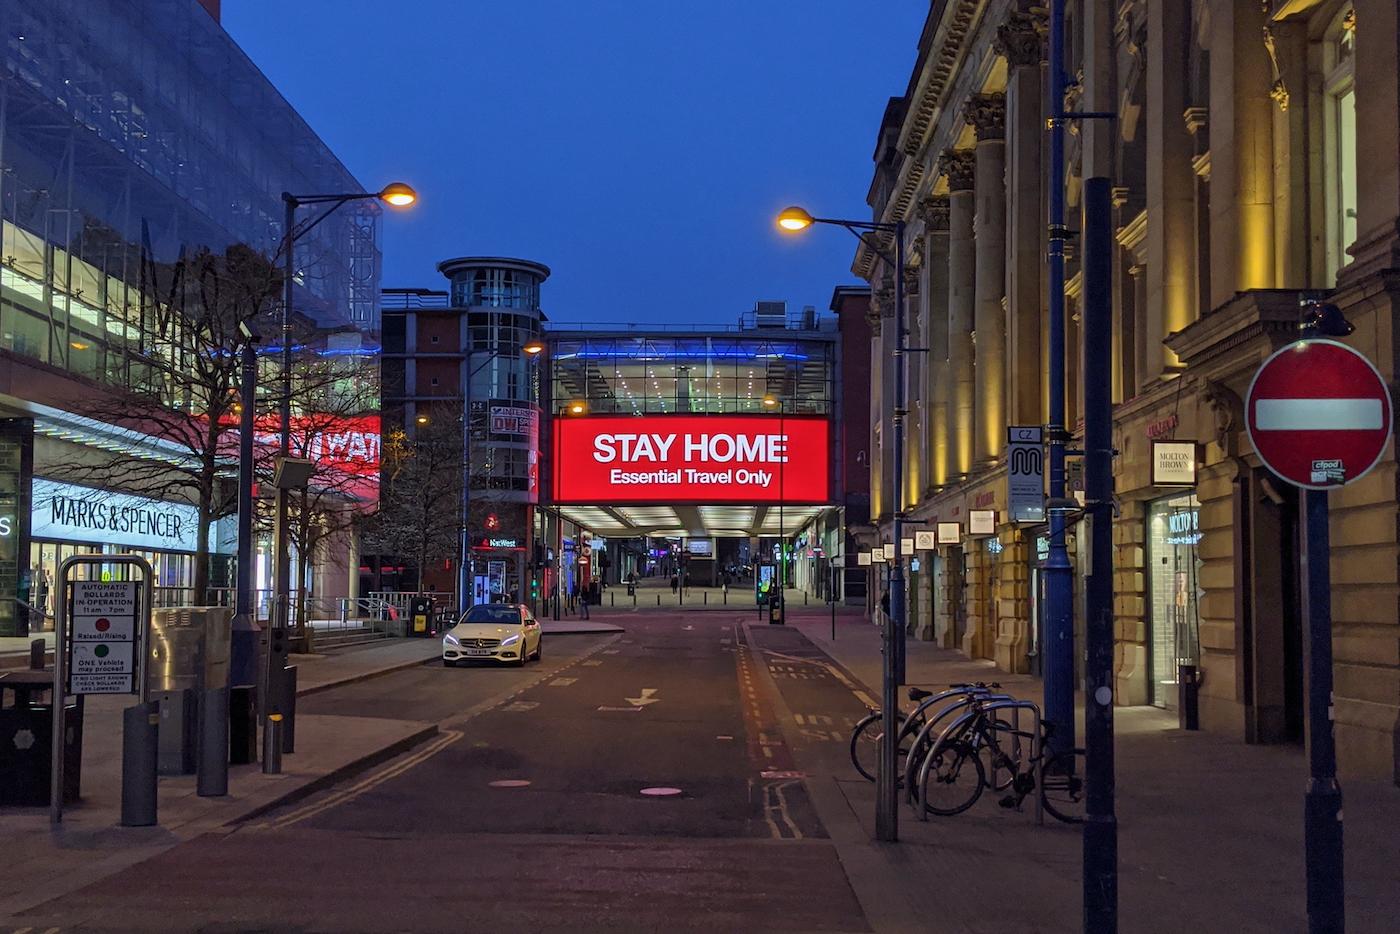 Sign in Manchester city centre displaying 'Stay Home'